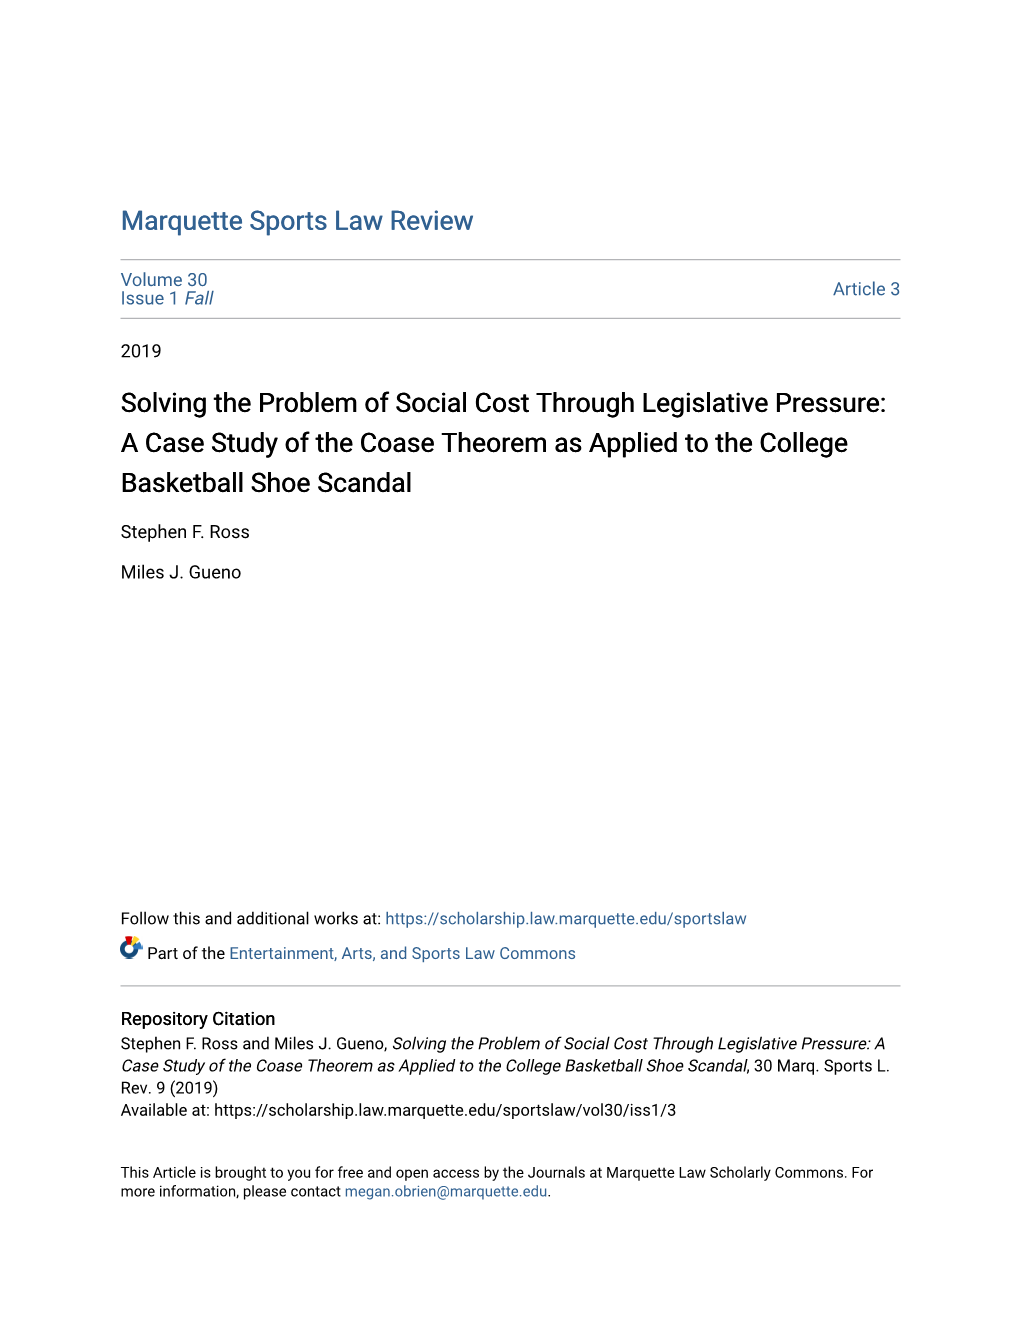 Solving the Problem of Social Cost Through Legislative Pressure: a Case Study of the Coase Theorem As Applied to the College Basketball Shoe Scandal